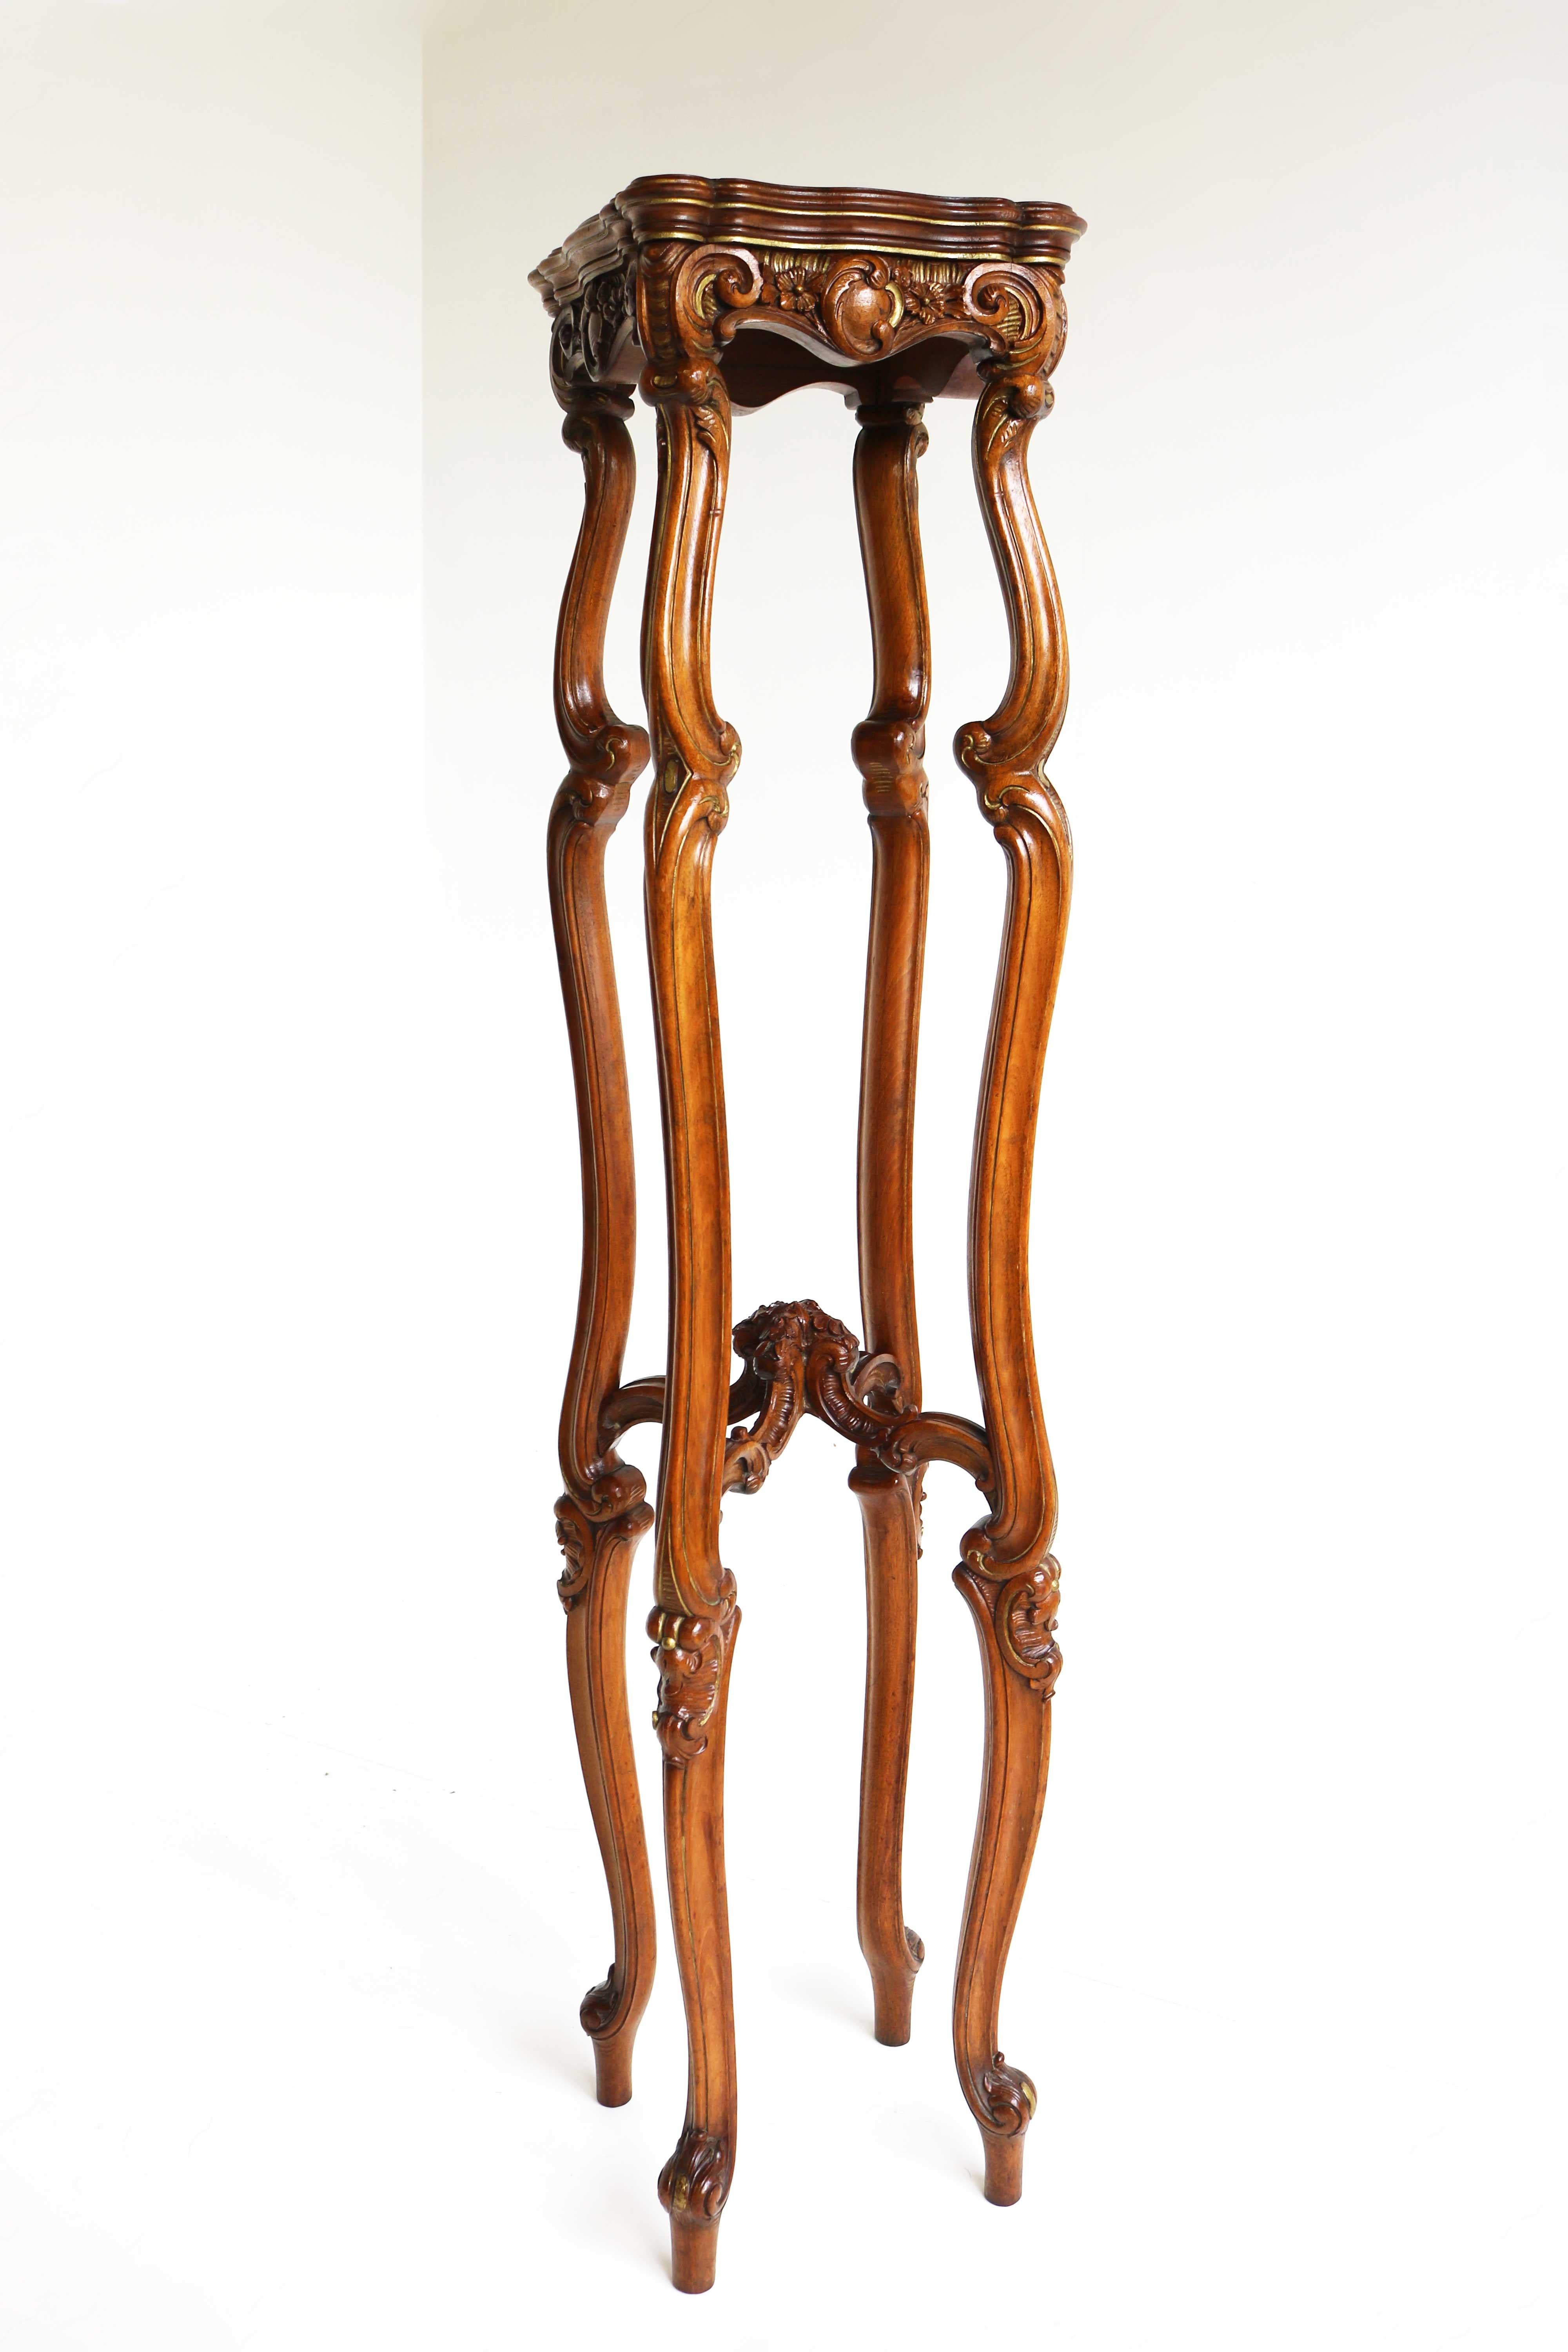 Antique French Louis XV Style Plant Stand, Carved Wood Table, Sculpture Pedestal, Late 19th Century
This highly decorative plant stand would make a statement and very eye-catching addition to any home, wherever placed.
Born in the late 19th